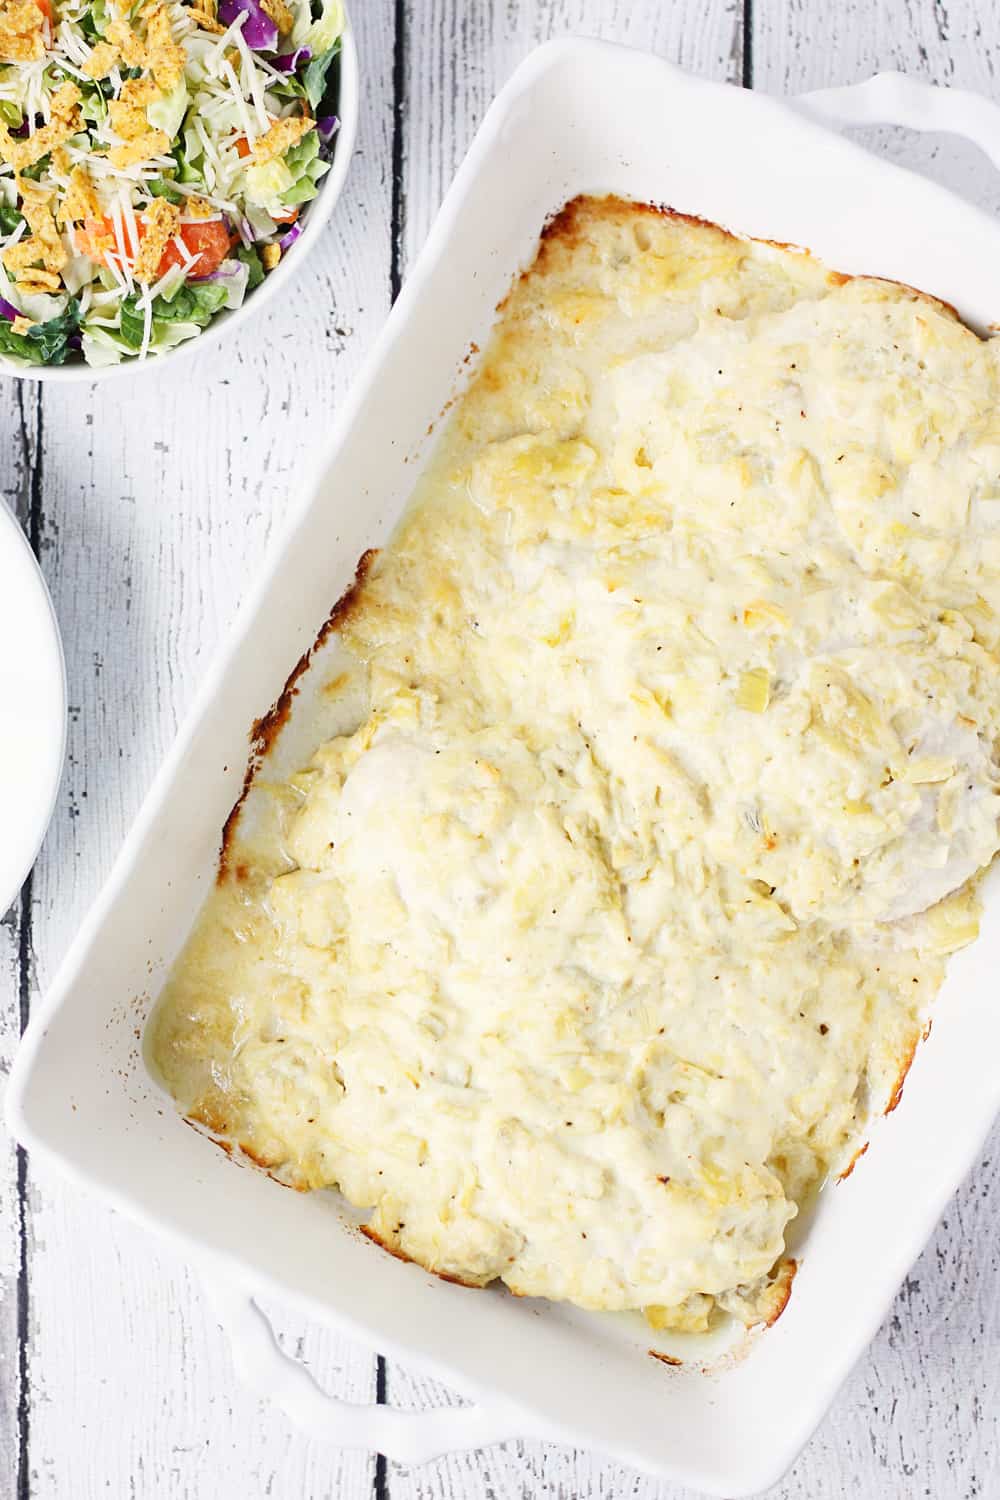 Artichoke Chicken Bake -- This artichoke chicken bake has only five ingredients, including the chicken breasts, and tastes like baked chicken smothered with hot artichoke dip. It's divine. | halfscratched #recipe #chicken